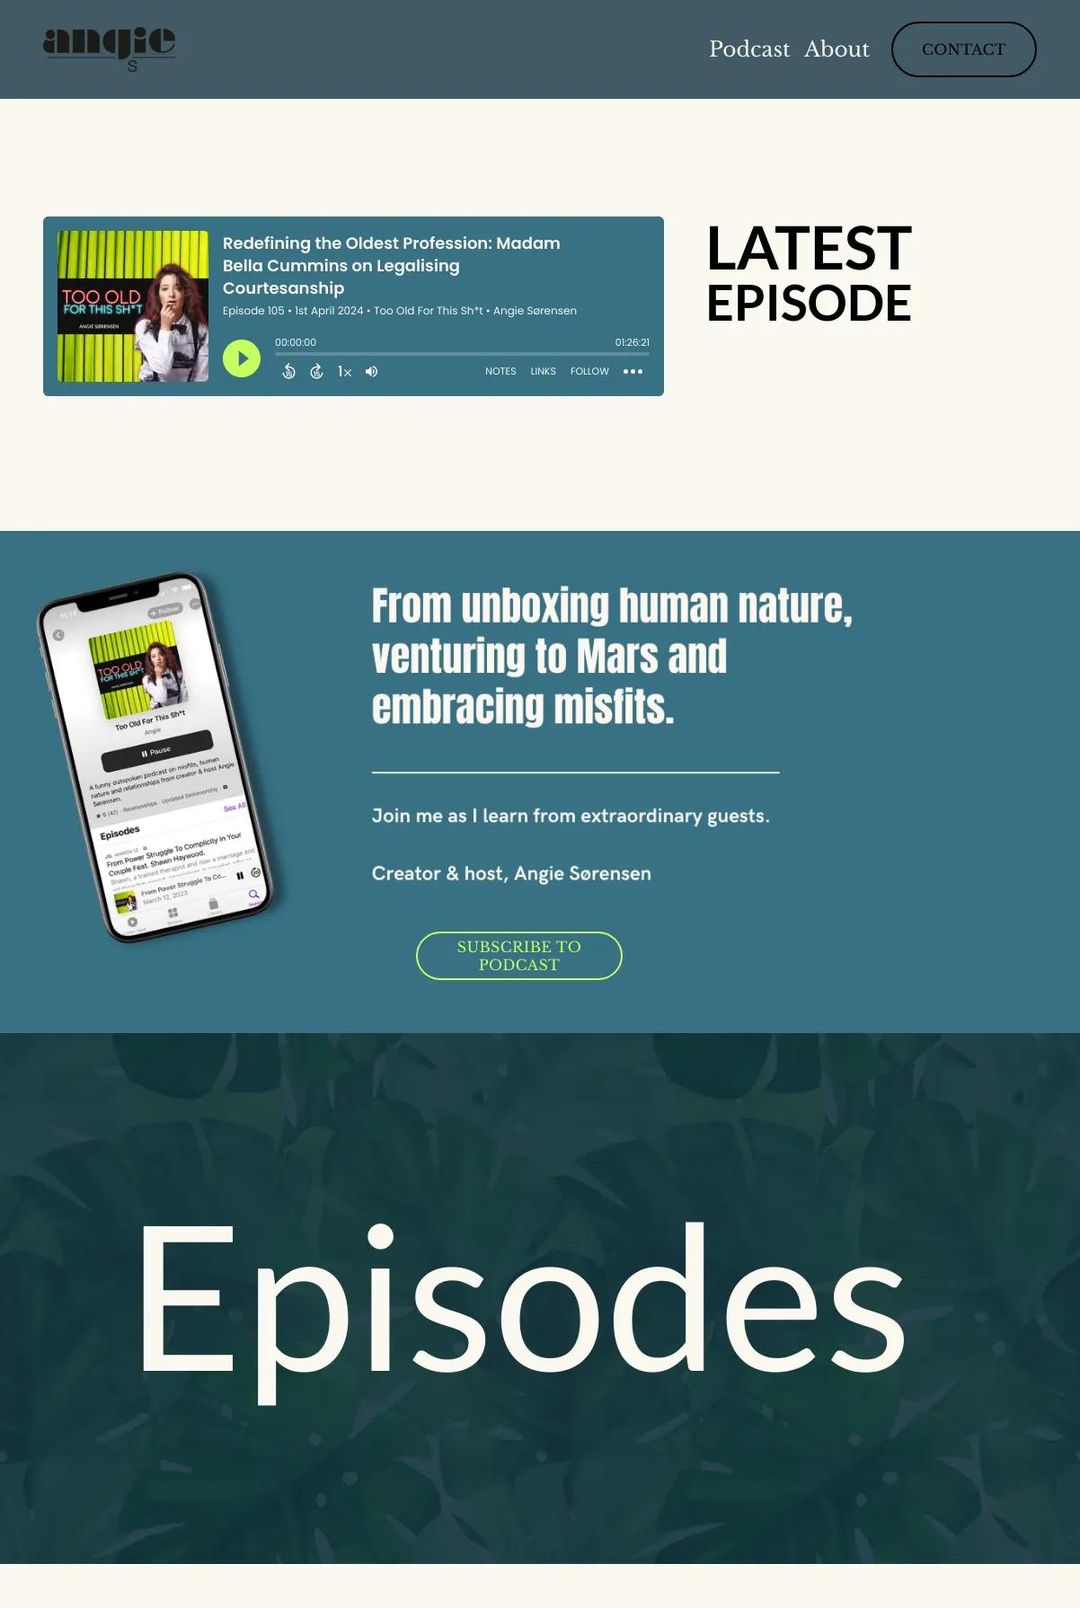 Screenshot 1 of Angie S (Example Squarespace Podcast Website)